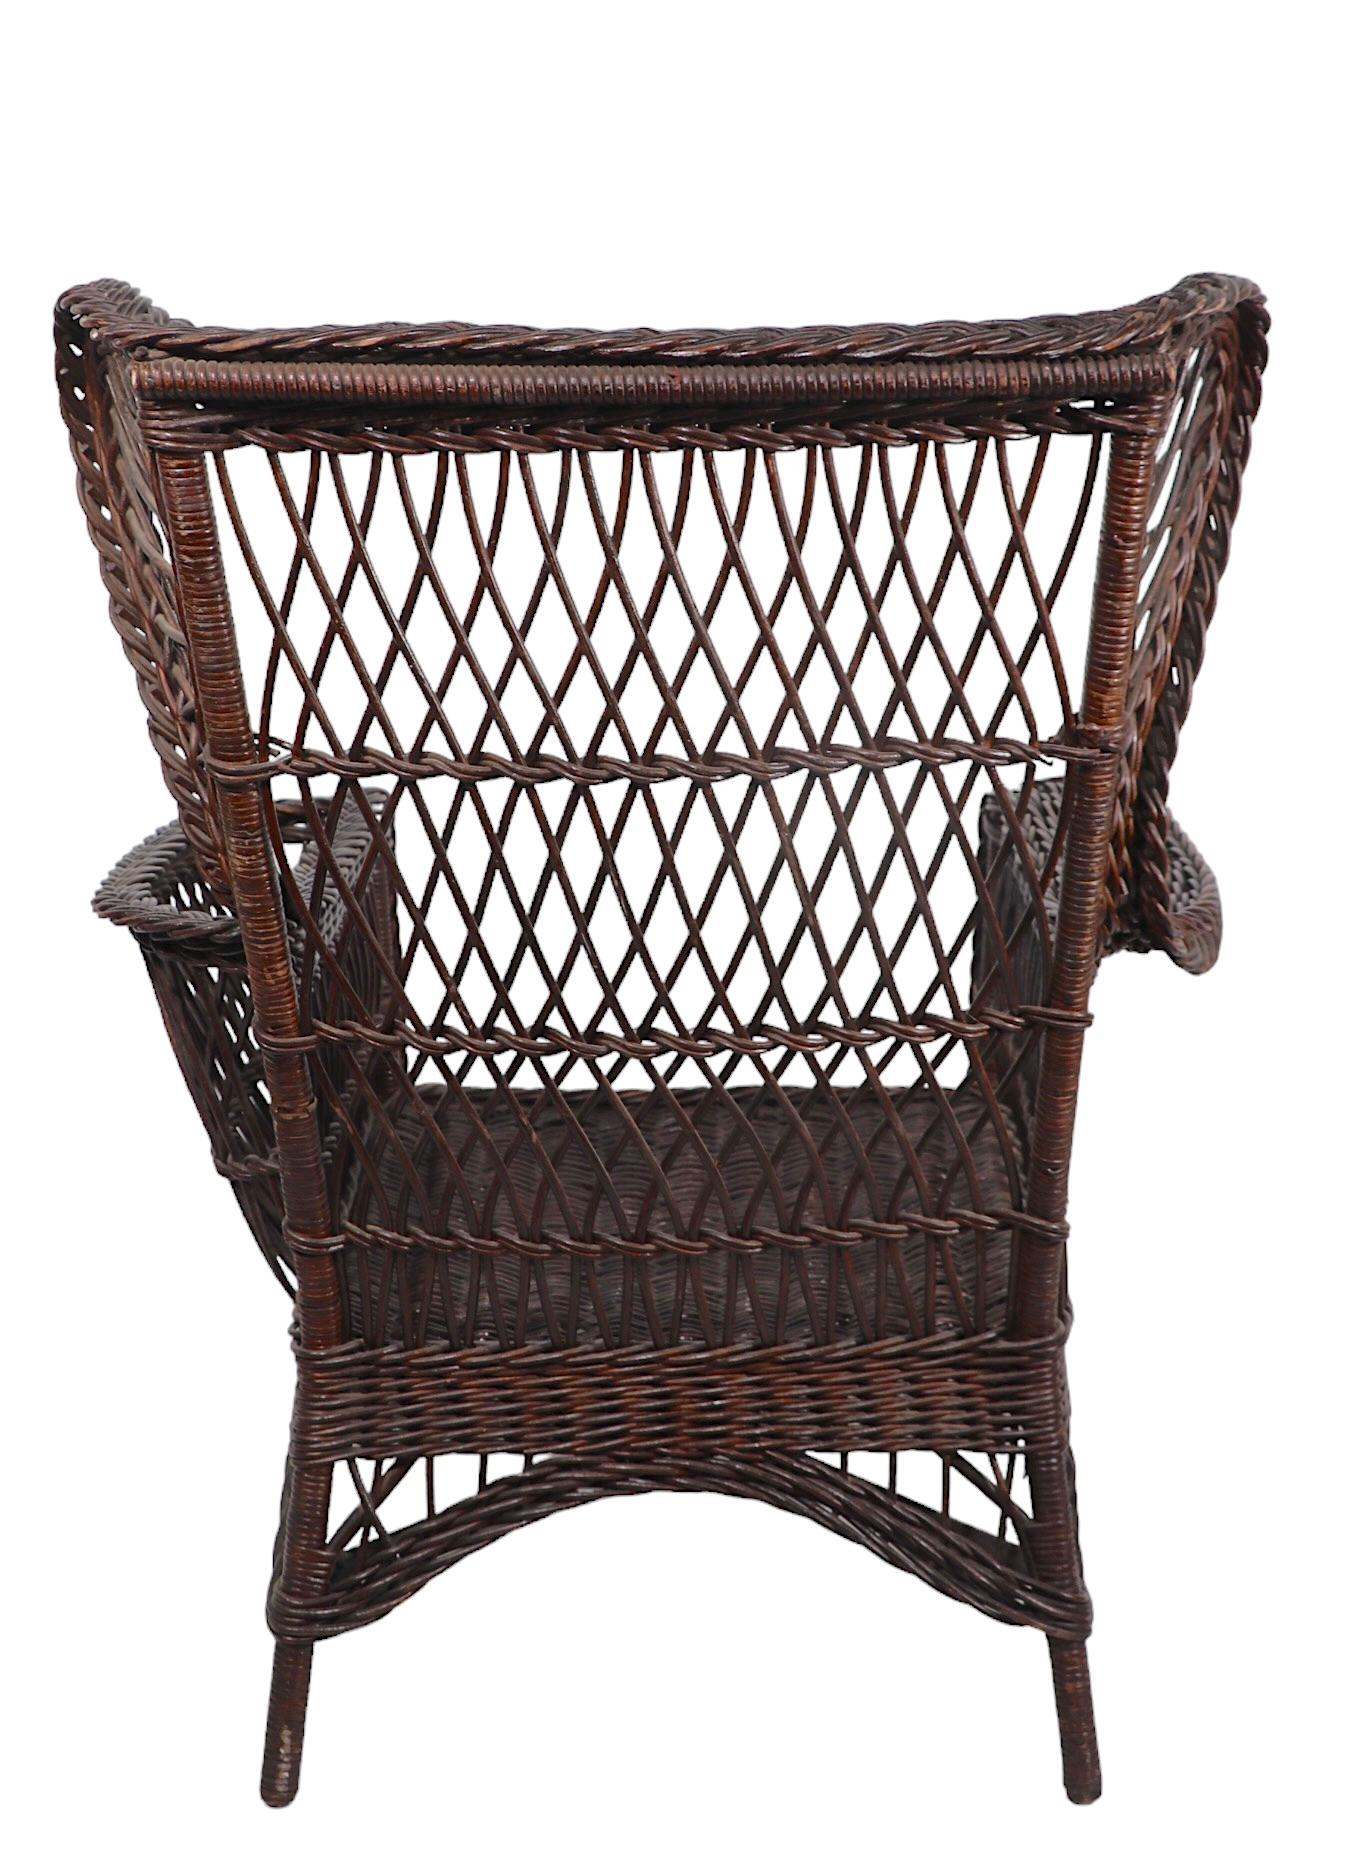 Victorian Bar Harbor Wicker Wing Chair with Magazine Rack Arm For Sale 2